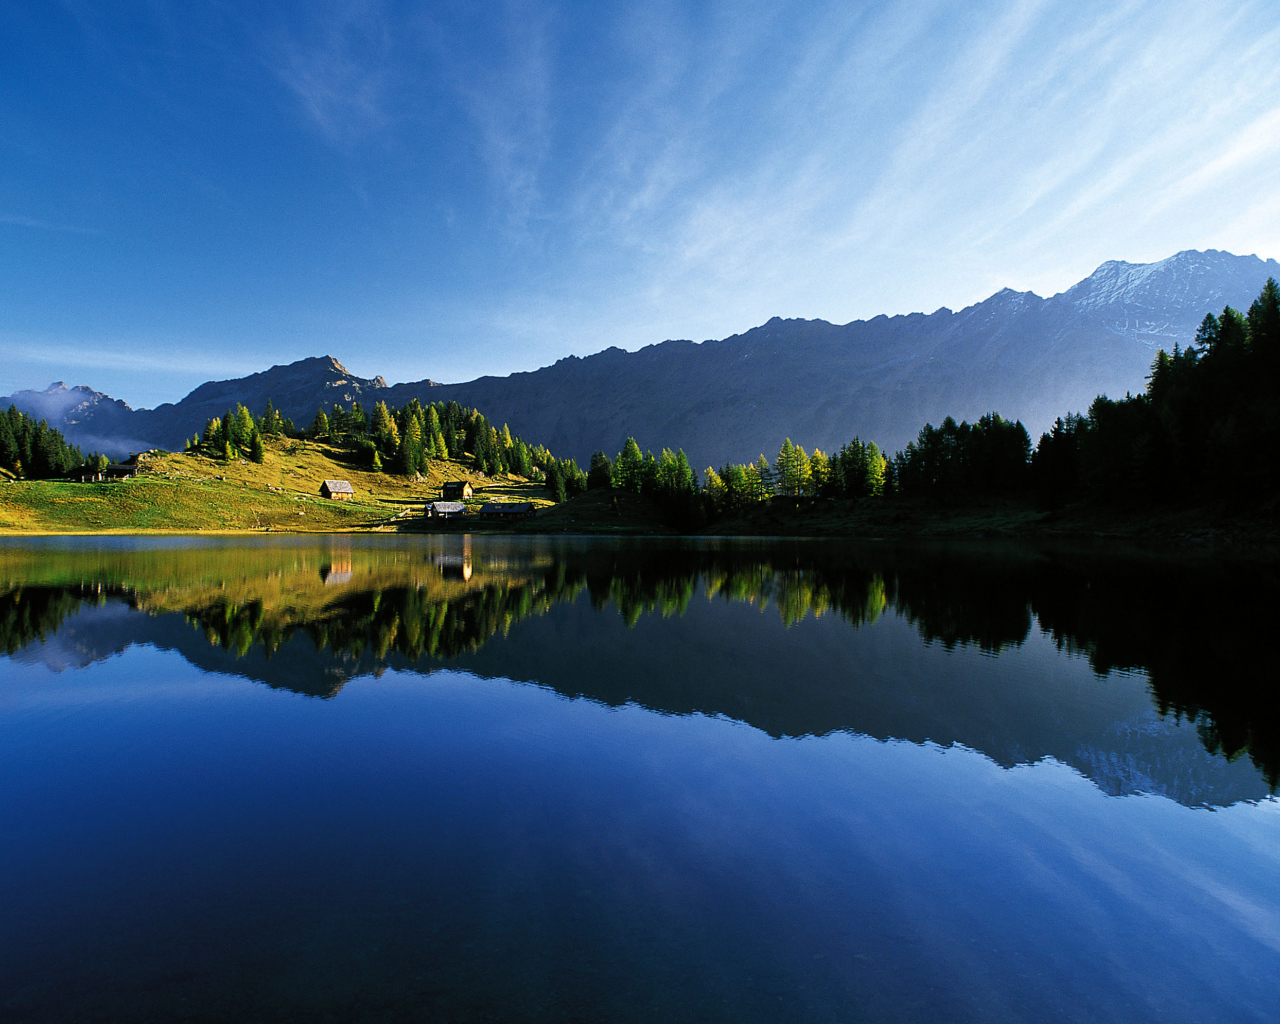 Lake in the mountains at the resort of Bad Loipersdorf, Austria